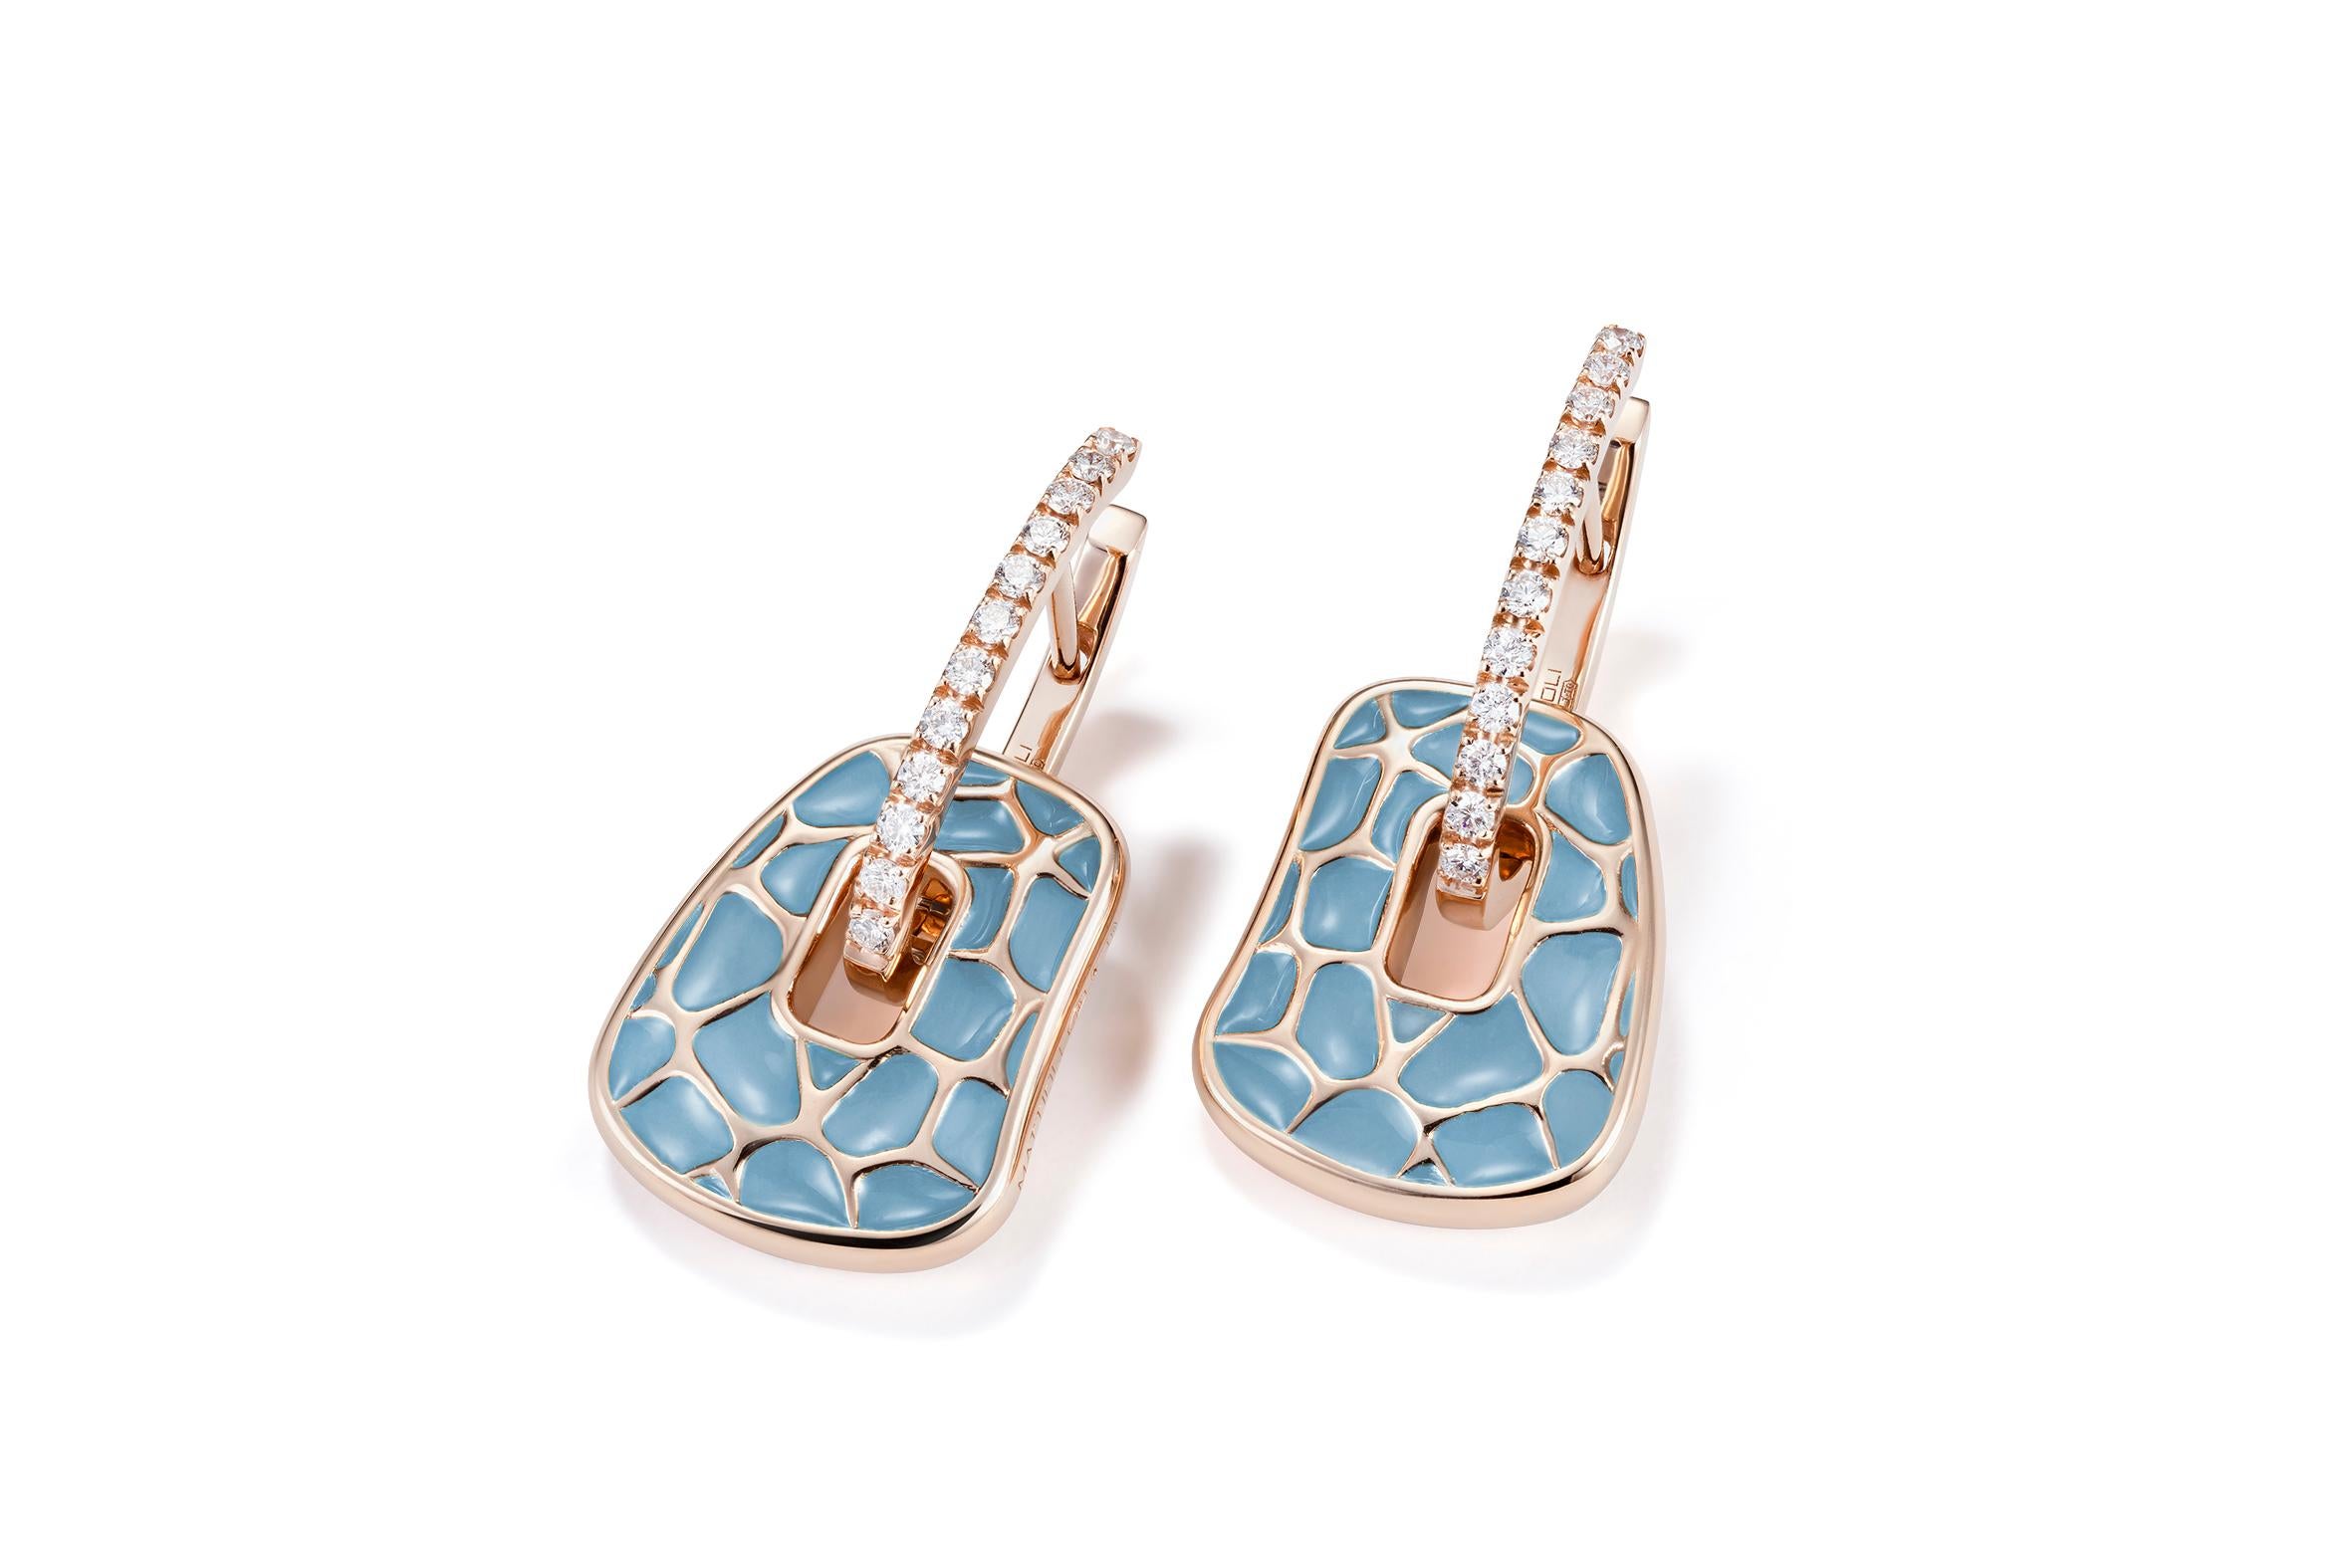 Mattioli Puzzle Collection 18k Rose Gold, Sky Blue Enamel & Quartzite 
with hoops in Rose Gold and White Diamonds Small Size
and three coloured pairs of puzzles to your choice 
Diamonds carat 0,34ct
Weight 10,80gr  
Puzzle pendants of mother of